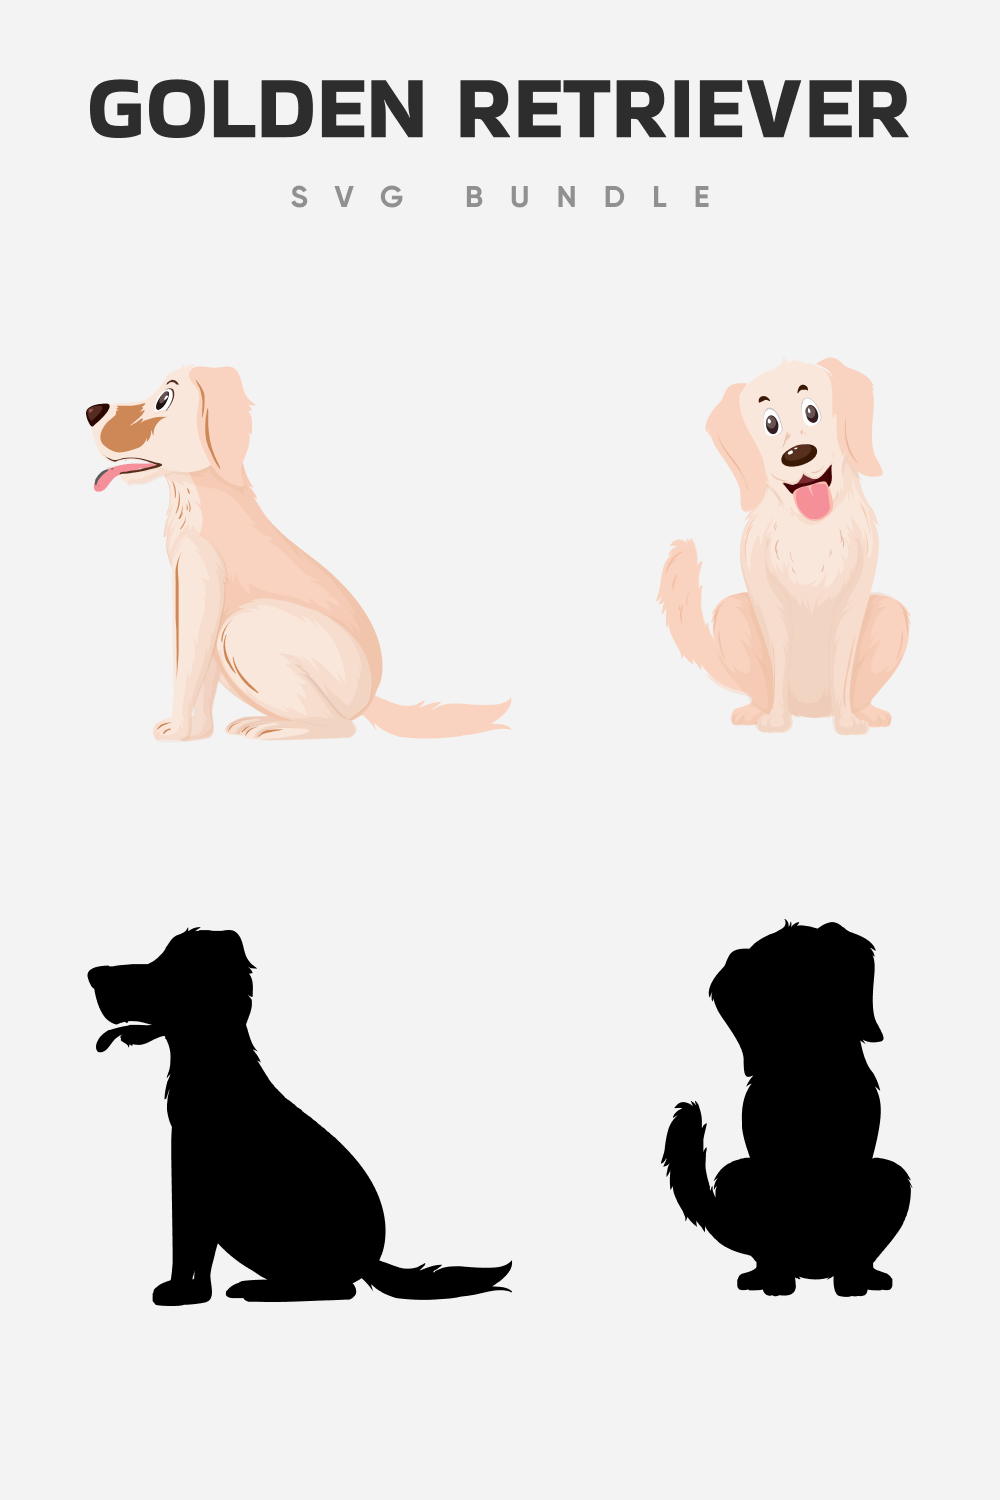 Golden retriever in color and black silhouette of a dog.